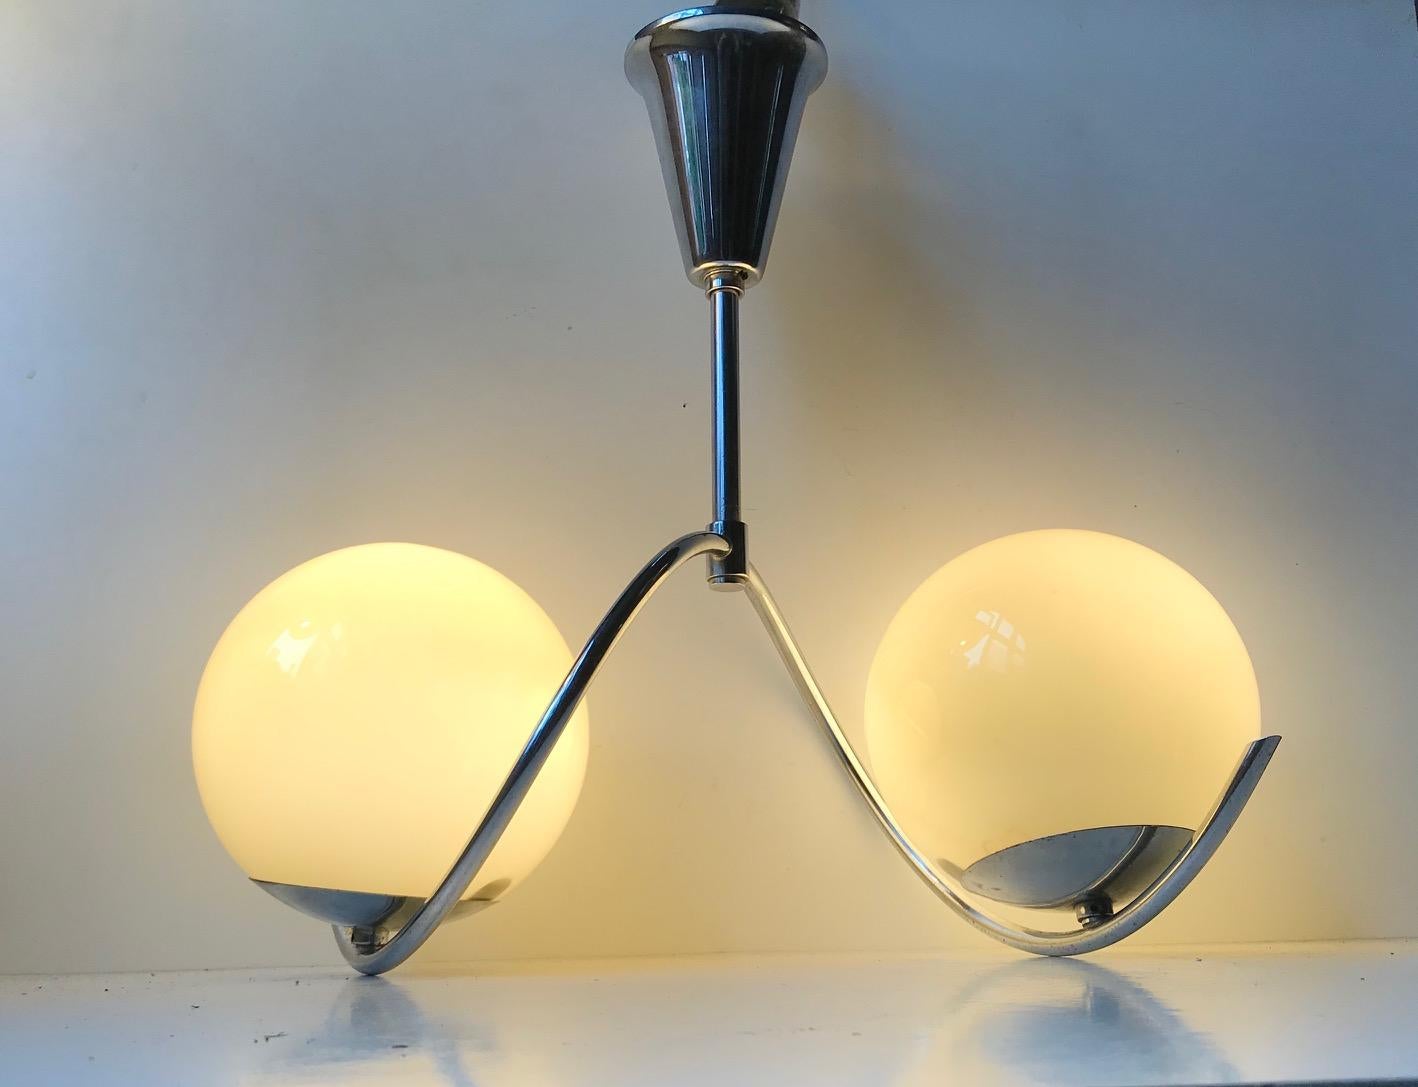 Blown Glass Art Deco, Bauhaus Chandelier with Two Globes by Voss, Denmark, 1930s